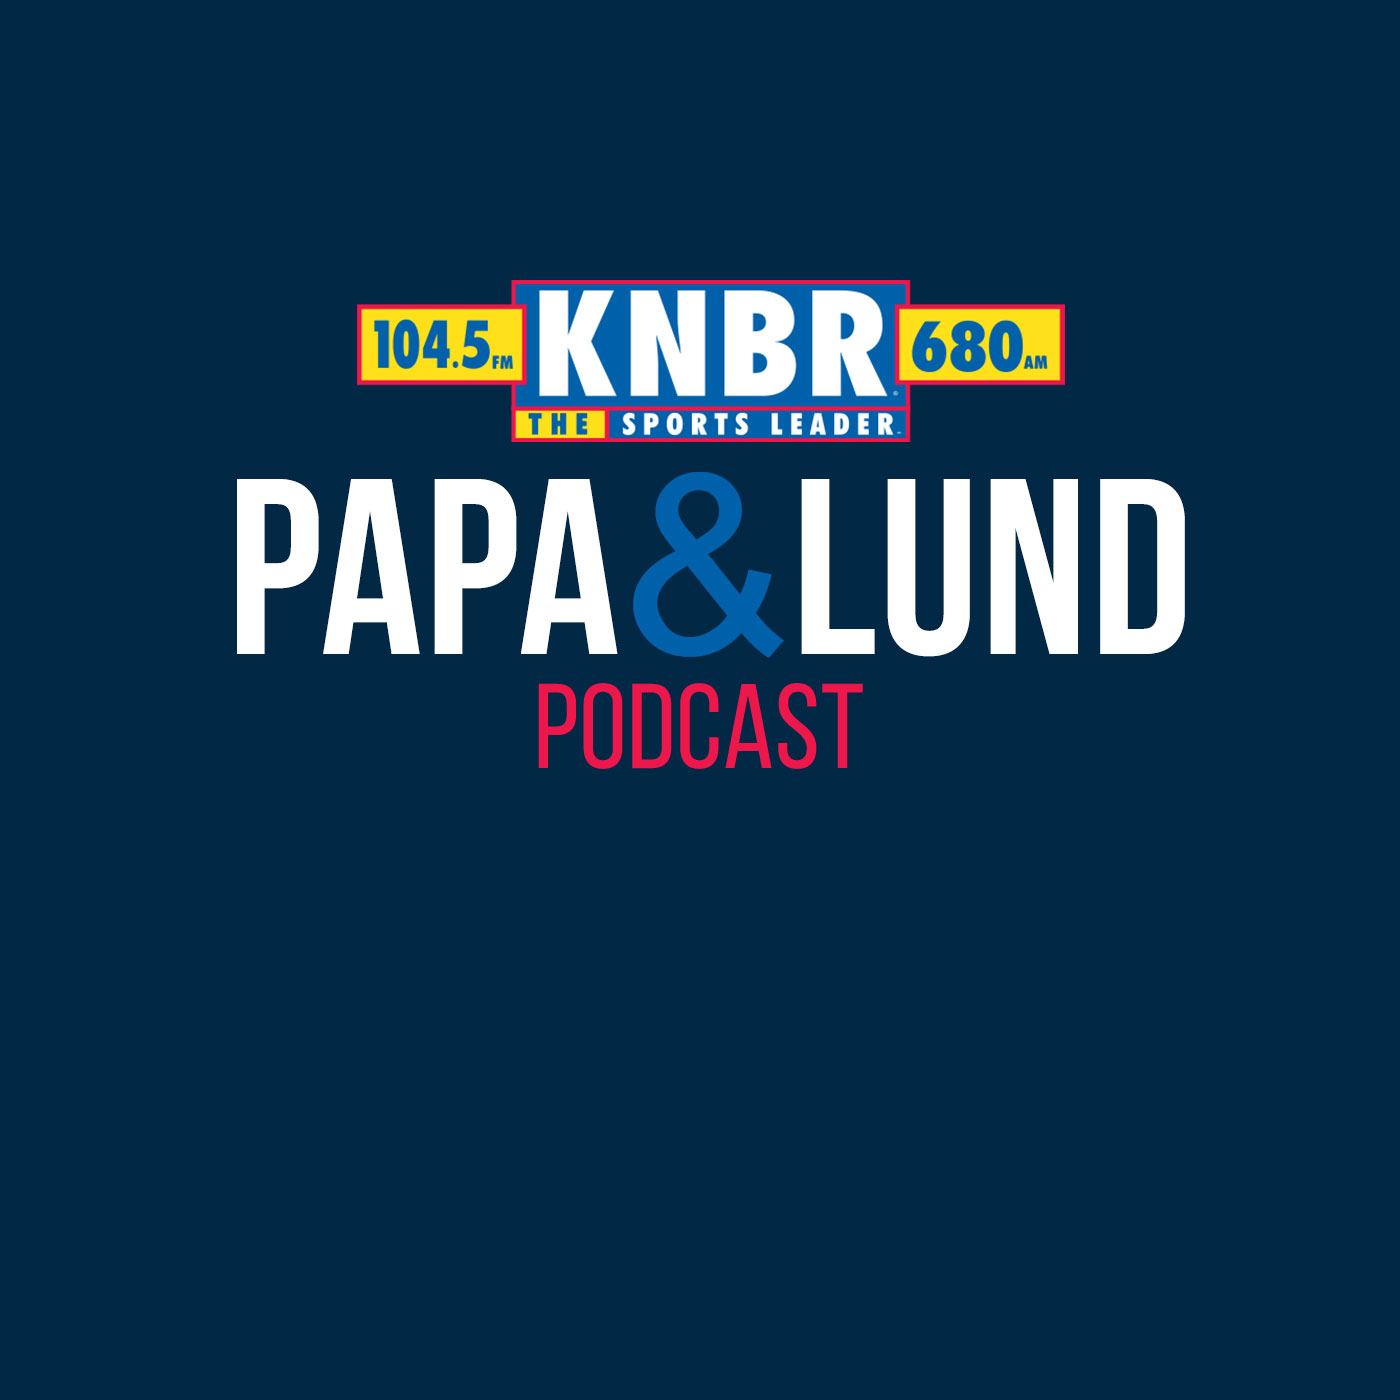 10-4 Bobby Marks joins Papa & Lund to discuss the offseason moves to bring in Chris Paul and how he believes the biggest impact on the team will come from within, starting with Jonathan Kuminga